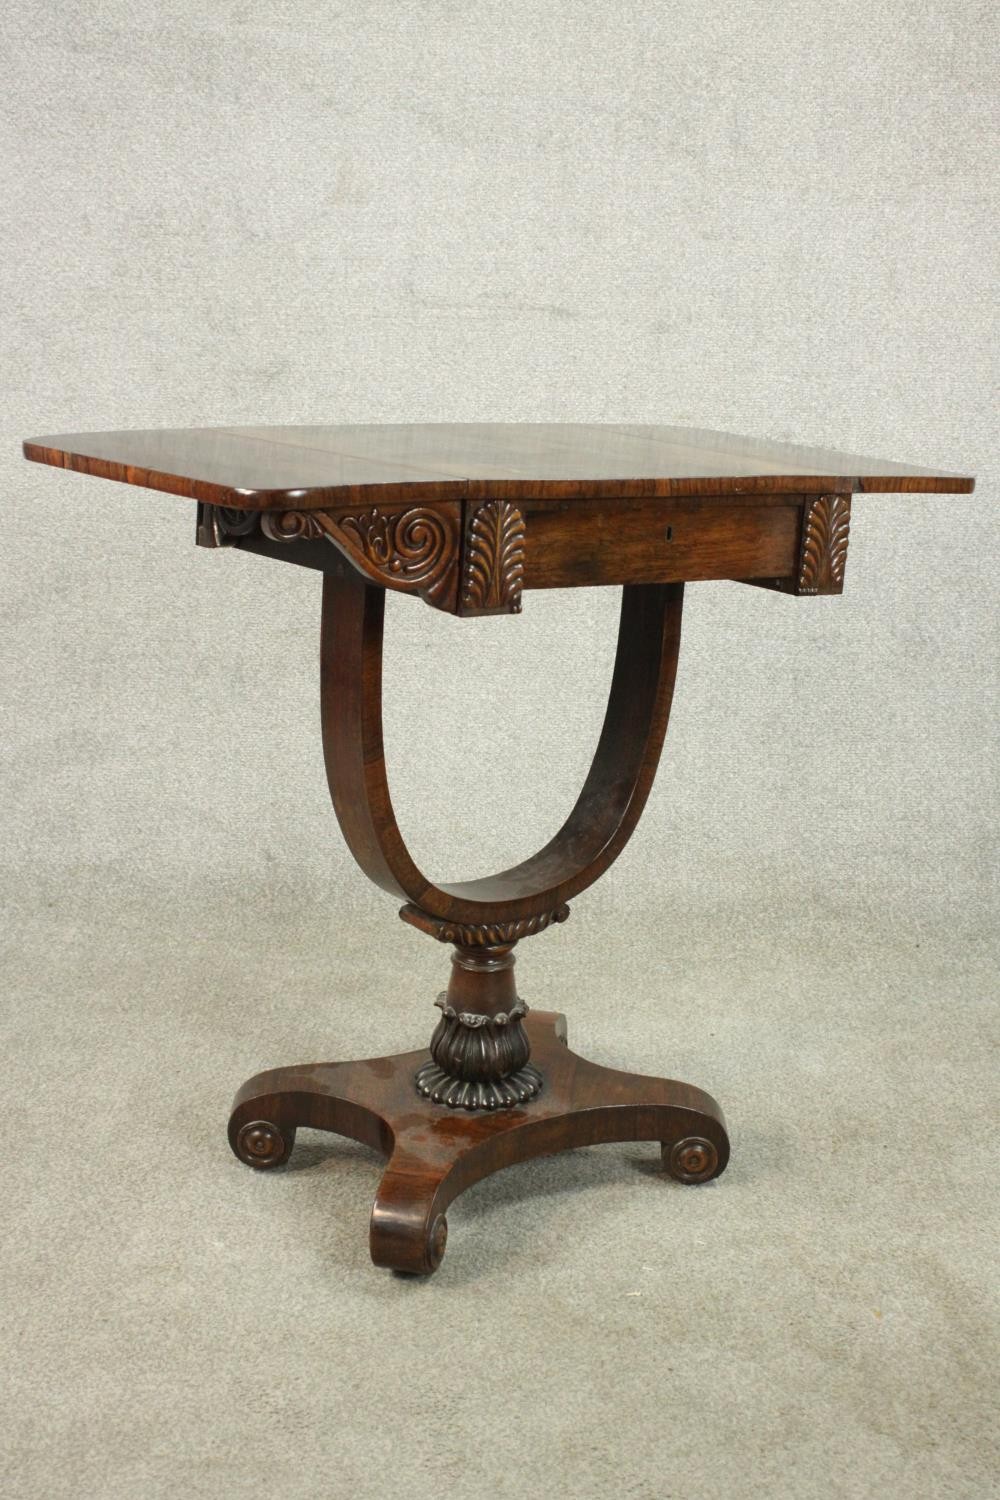 A William IV rosewood drop leaf work table, with a single drawer flanked by applied palm leaves, - Image 11 of 11